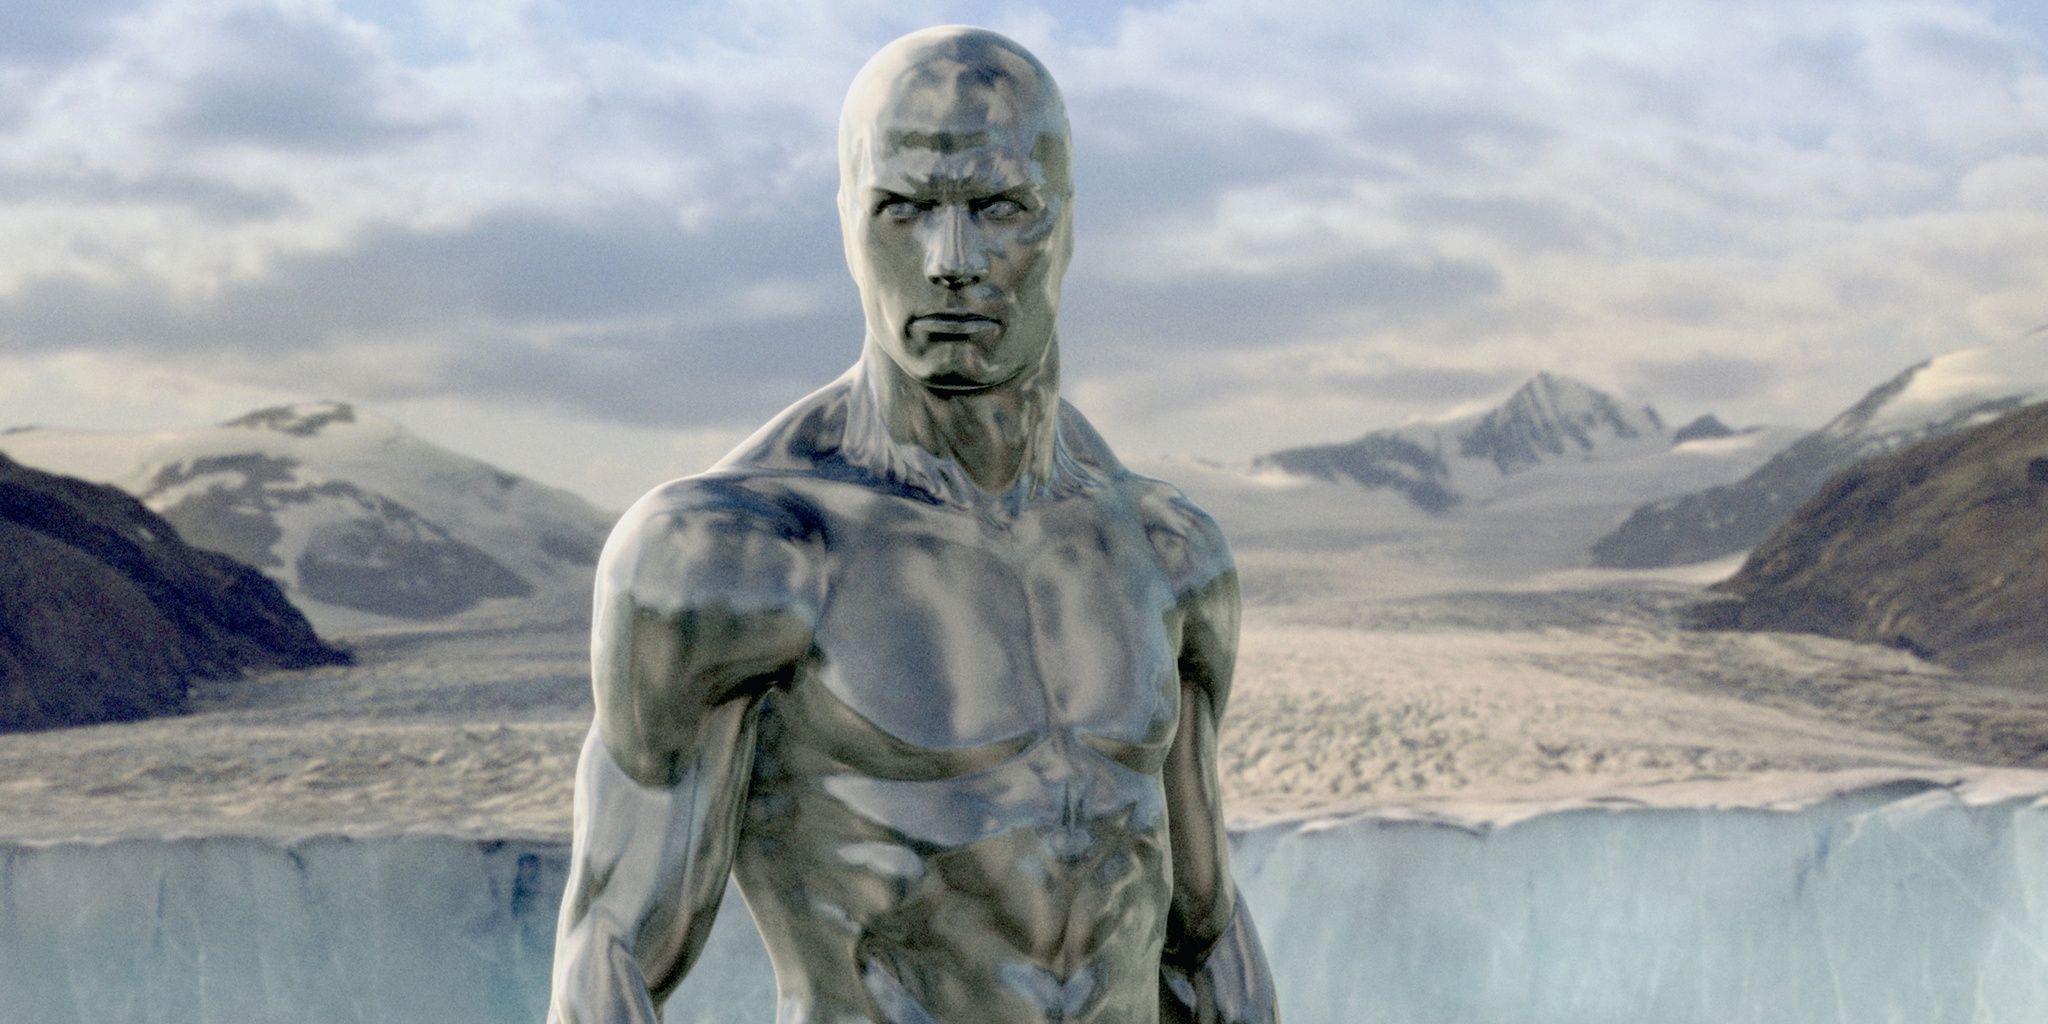 An image of Silversurfer